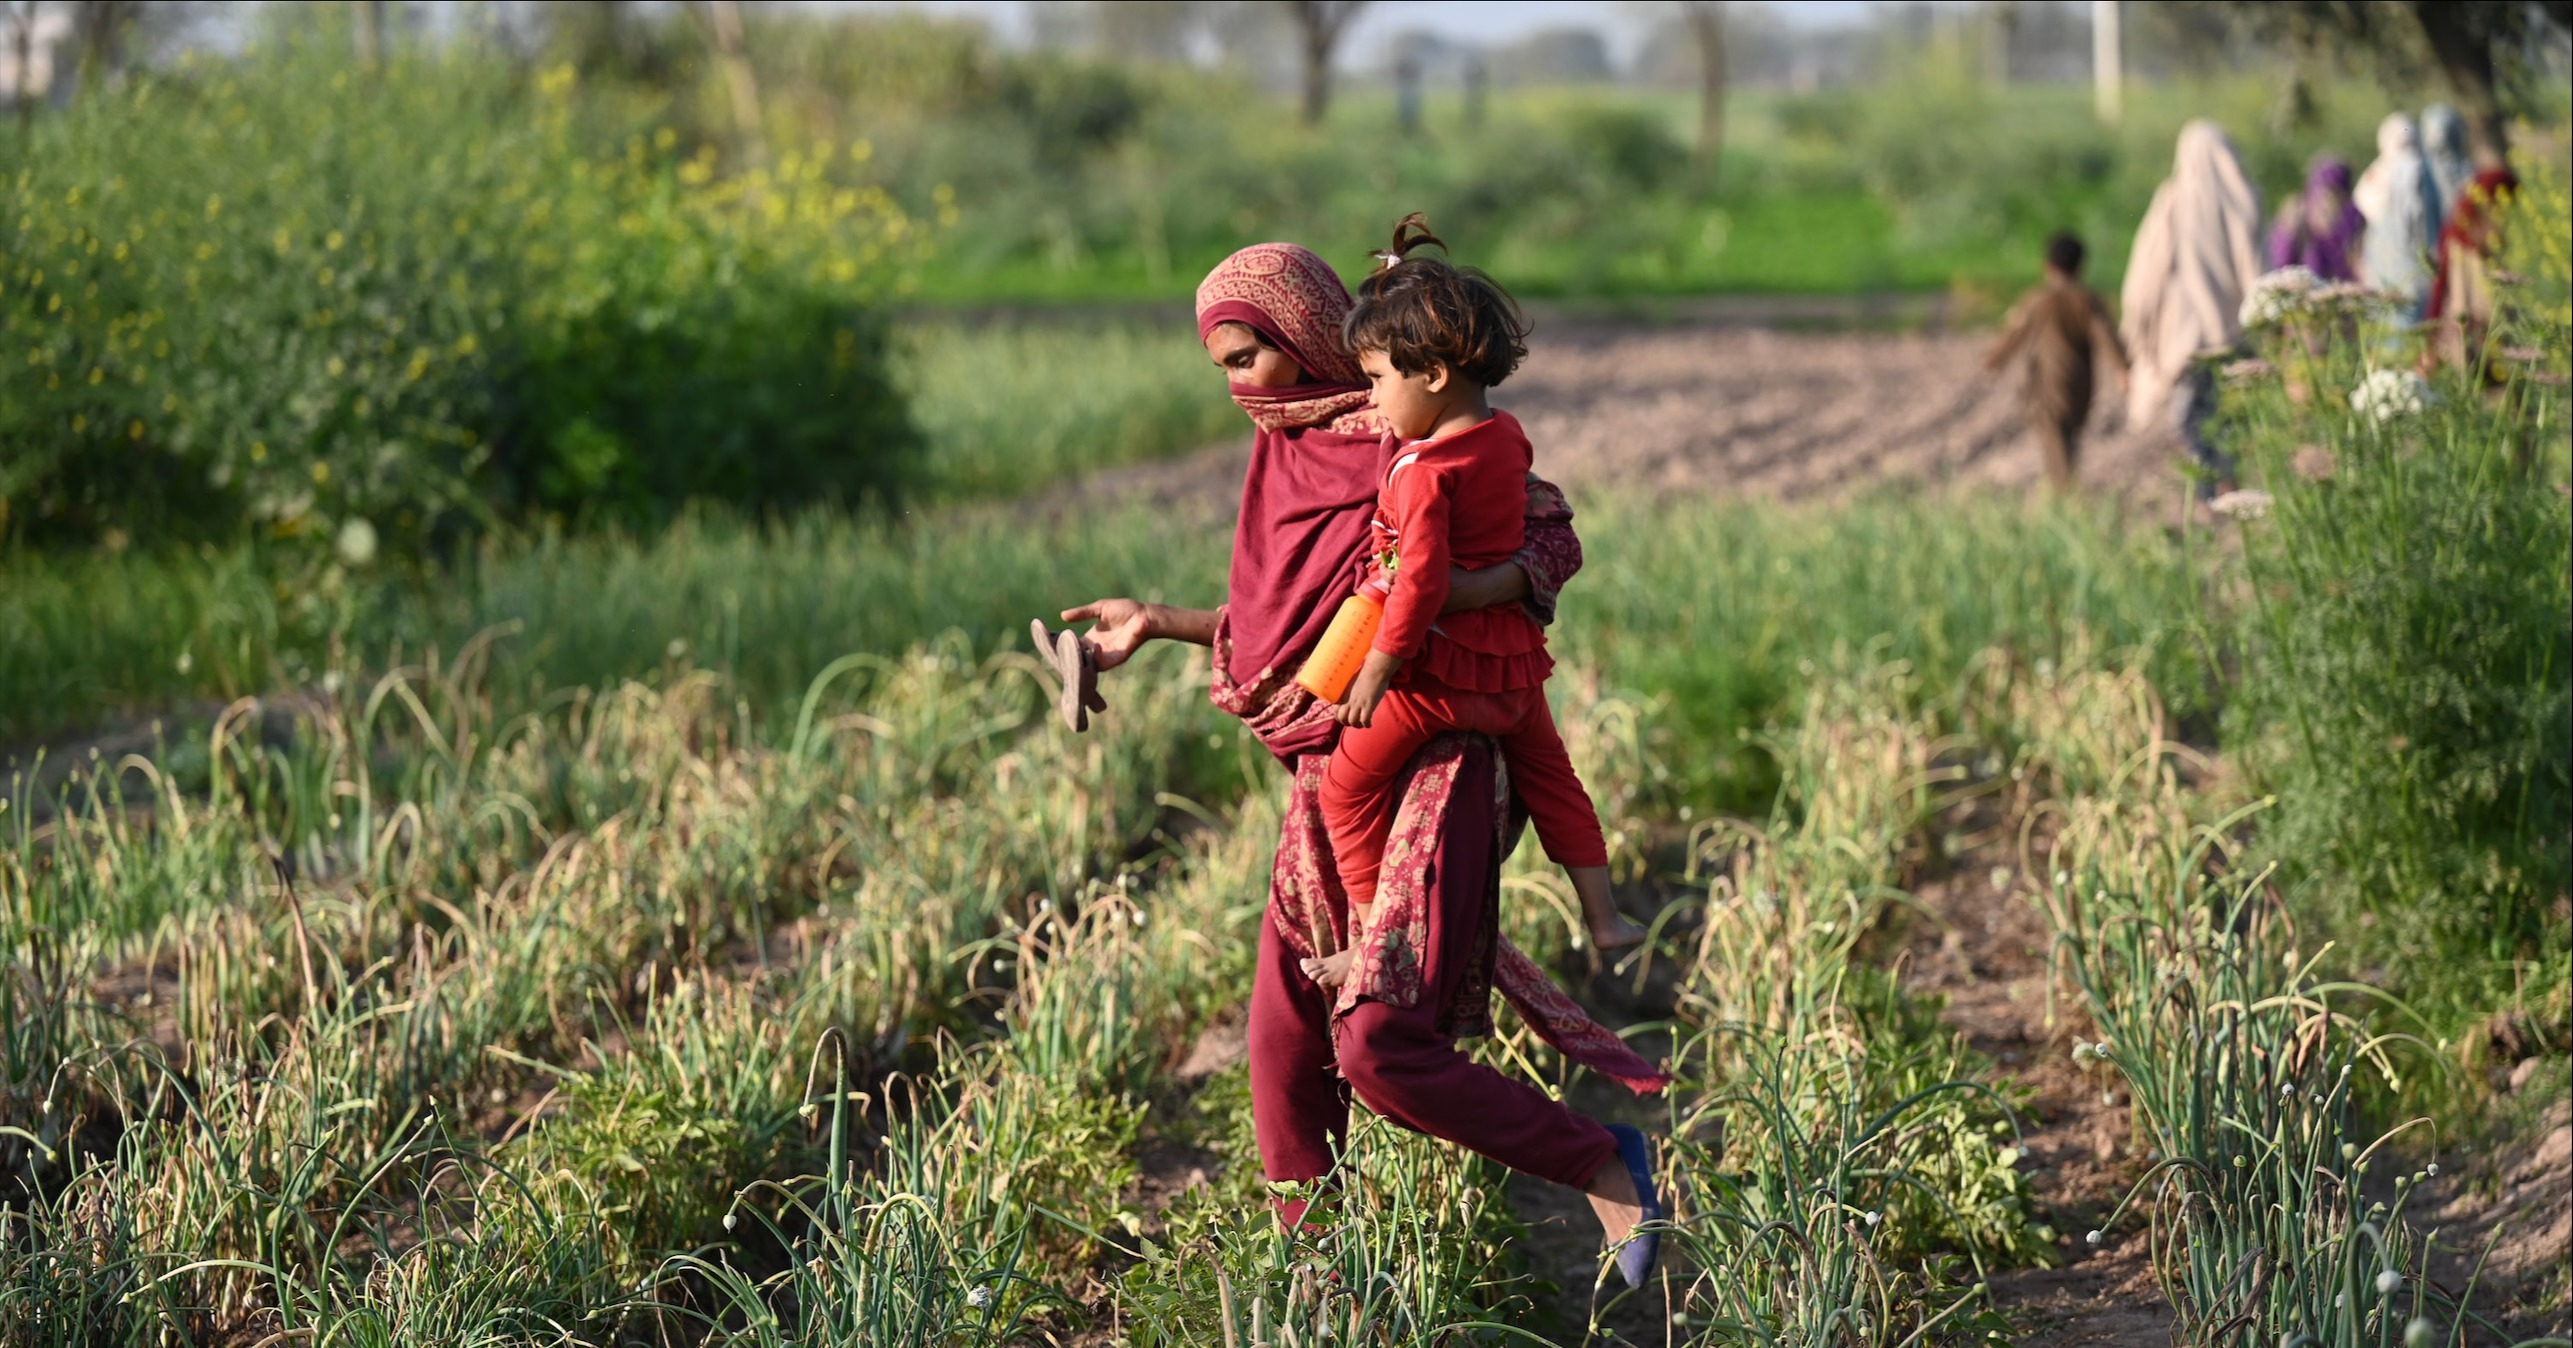 A mother and her child in a field in Pakistan